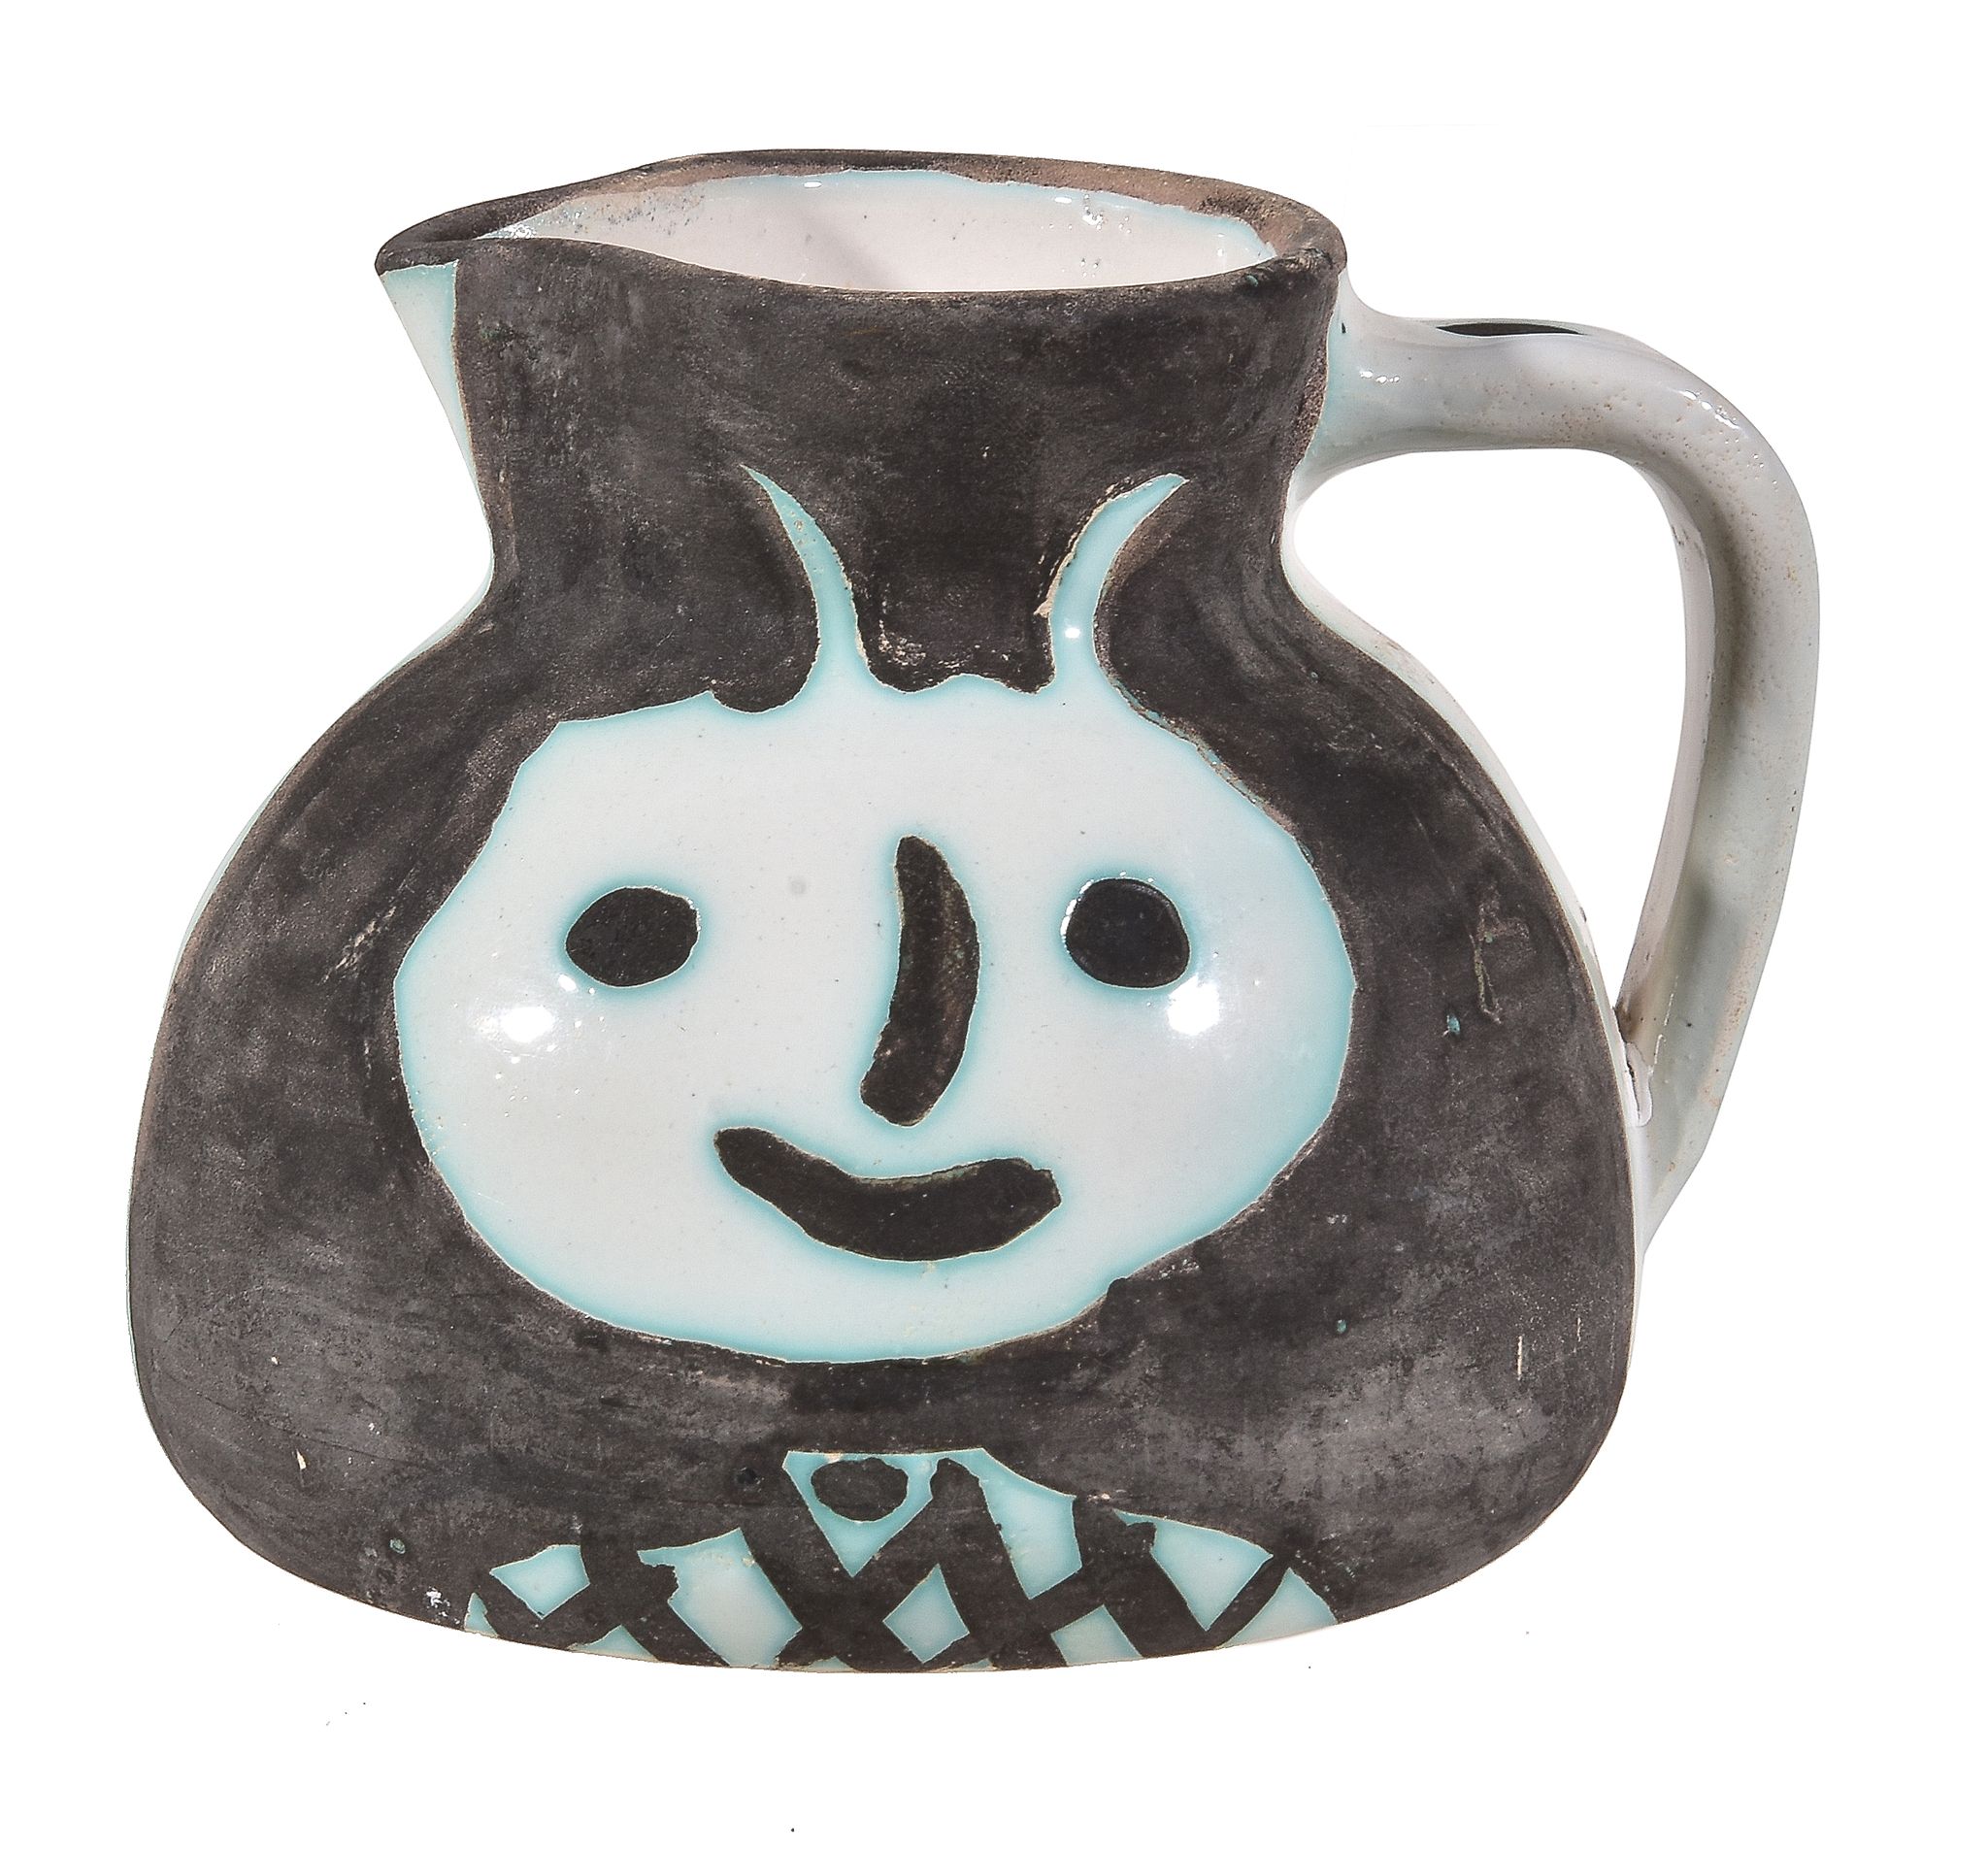 Pablo Picasso (1881-1973) for Madoura, Pichet Tetes, an earthenware pitcher or jug, with black